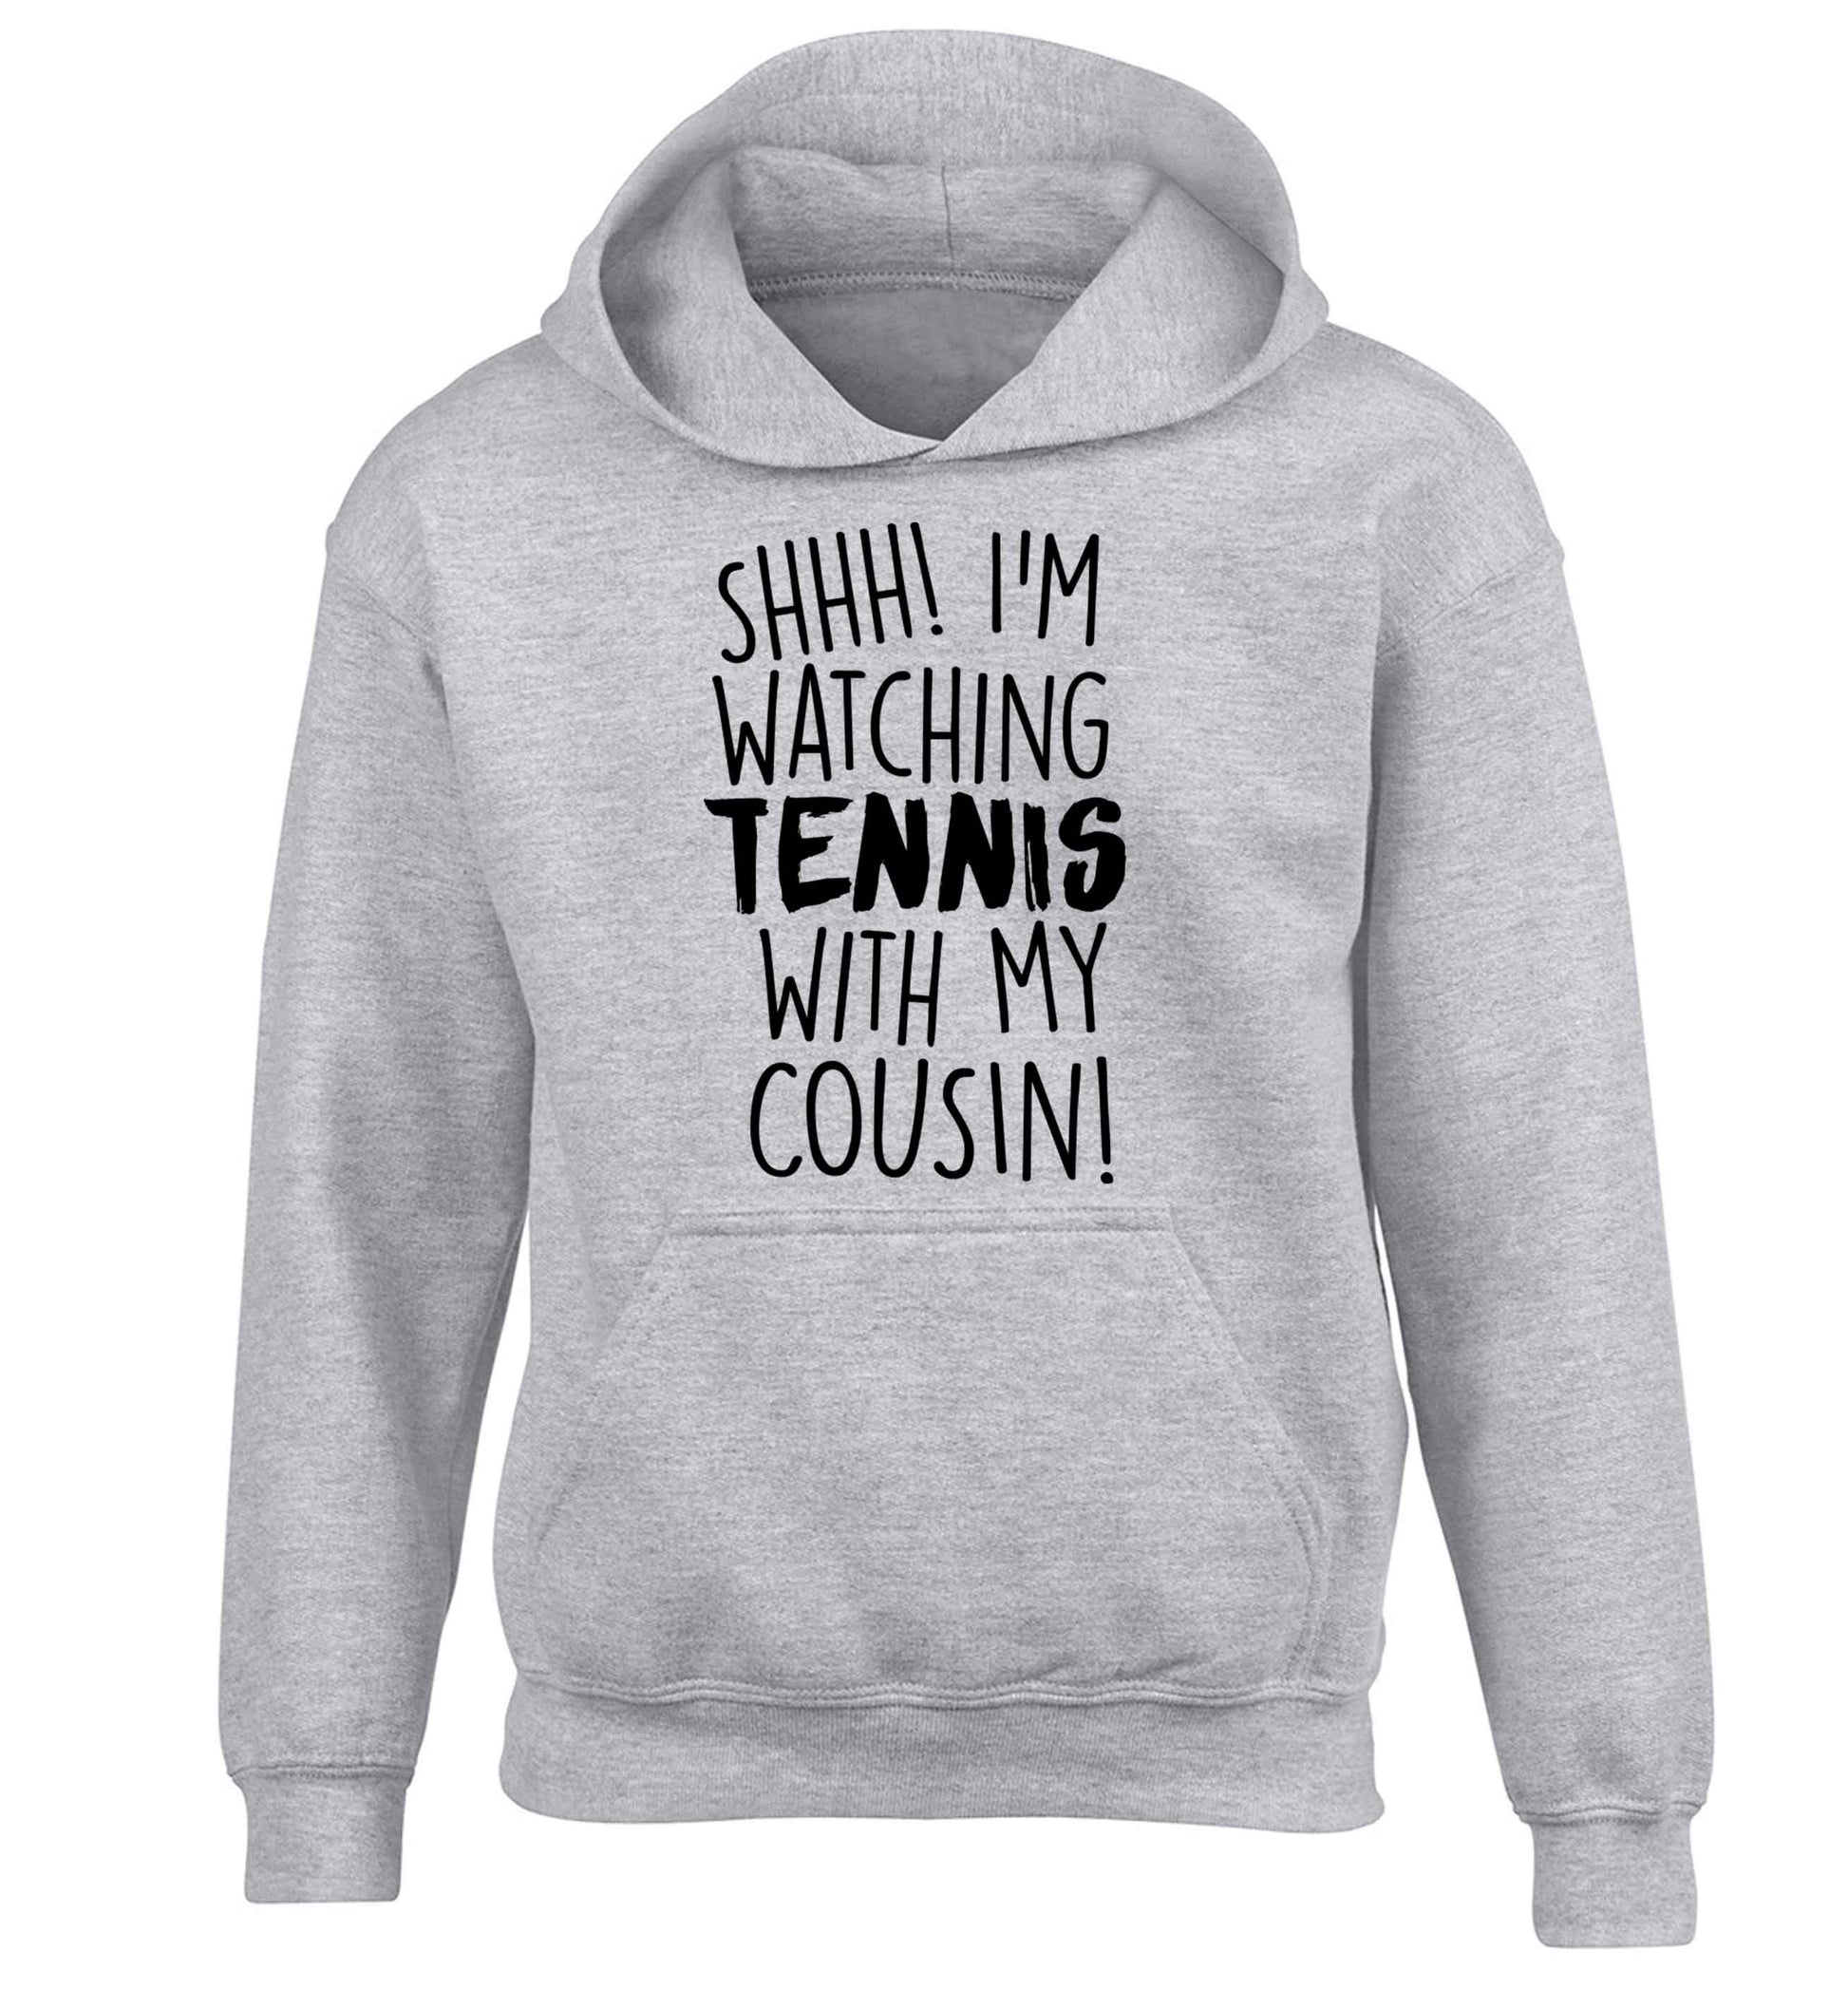 Shh! I'm watching tennis with my cousin! children's grey hoodie 12-13 Years